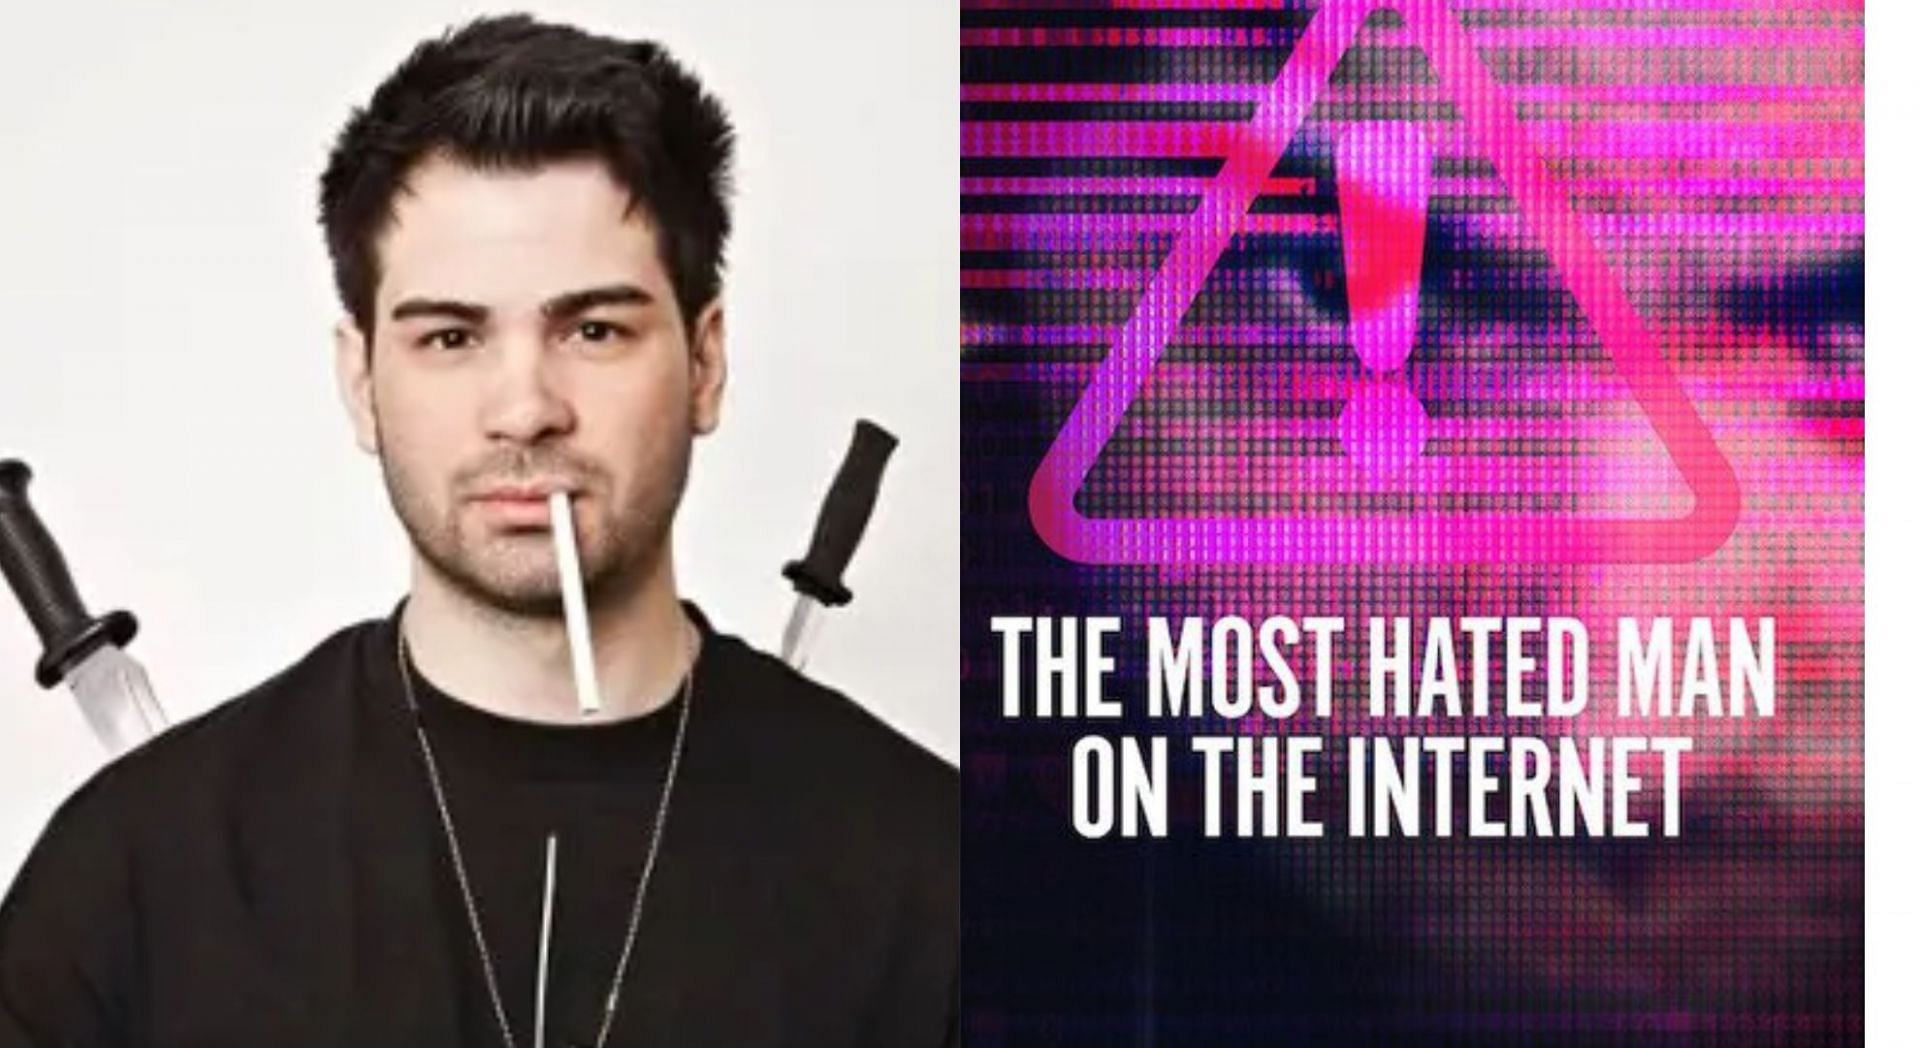 A new docuseries on ex-convict Hunter Moore titled &ldquo;The Most Hated Man on the Internet&rdquo; is currently streaming on Netflix (Image via Netflix)